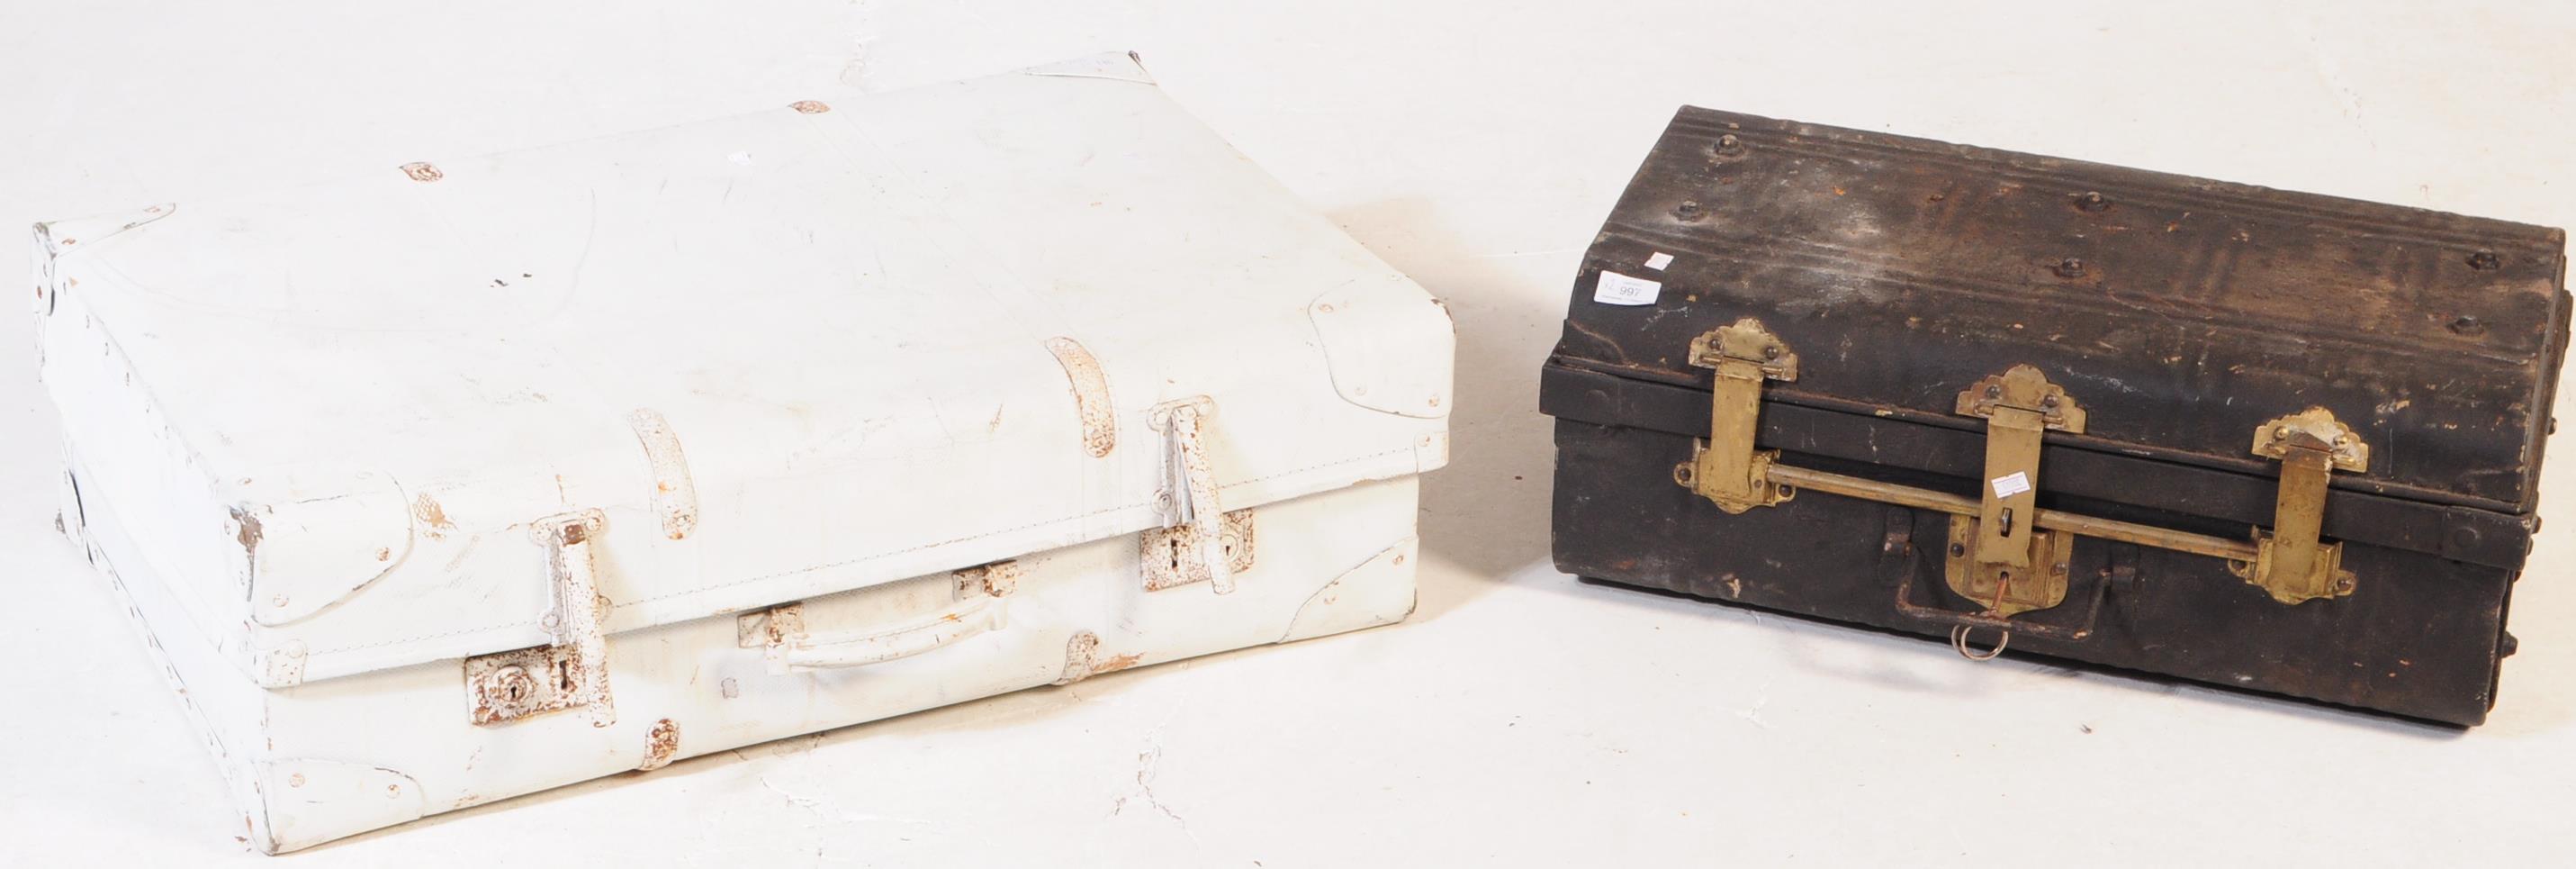 TWO VINTAGE 20TH CENTURY TRAVEL SUITCASE TRUNKS - Image 2 of 4